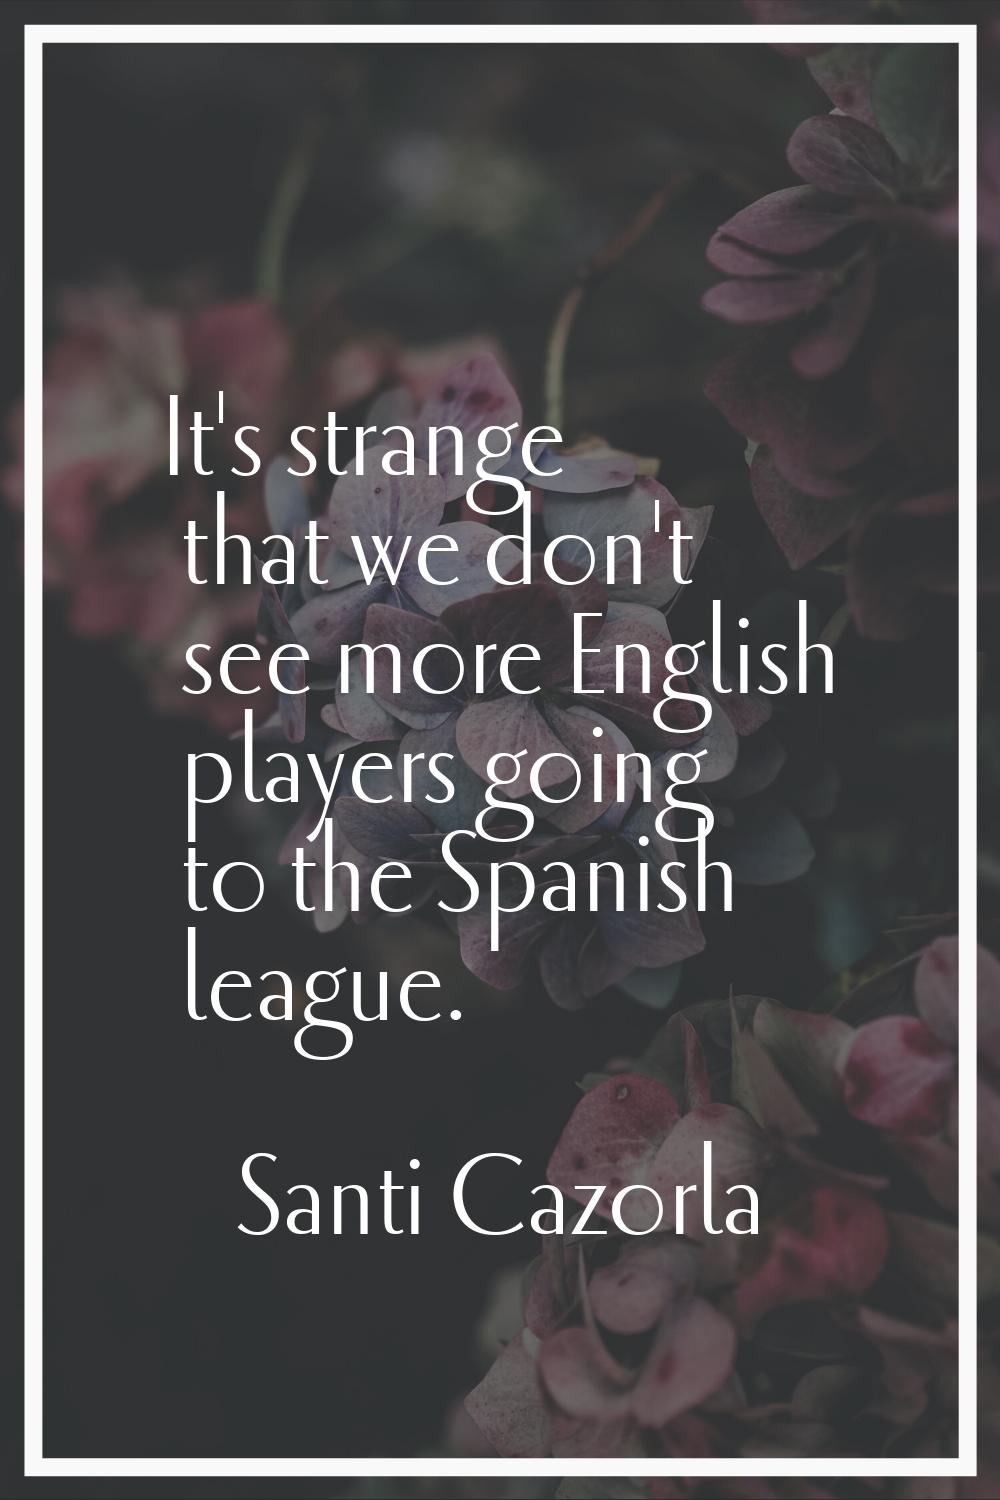 It's strange that we don't see more English players going to the Spanish league.